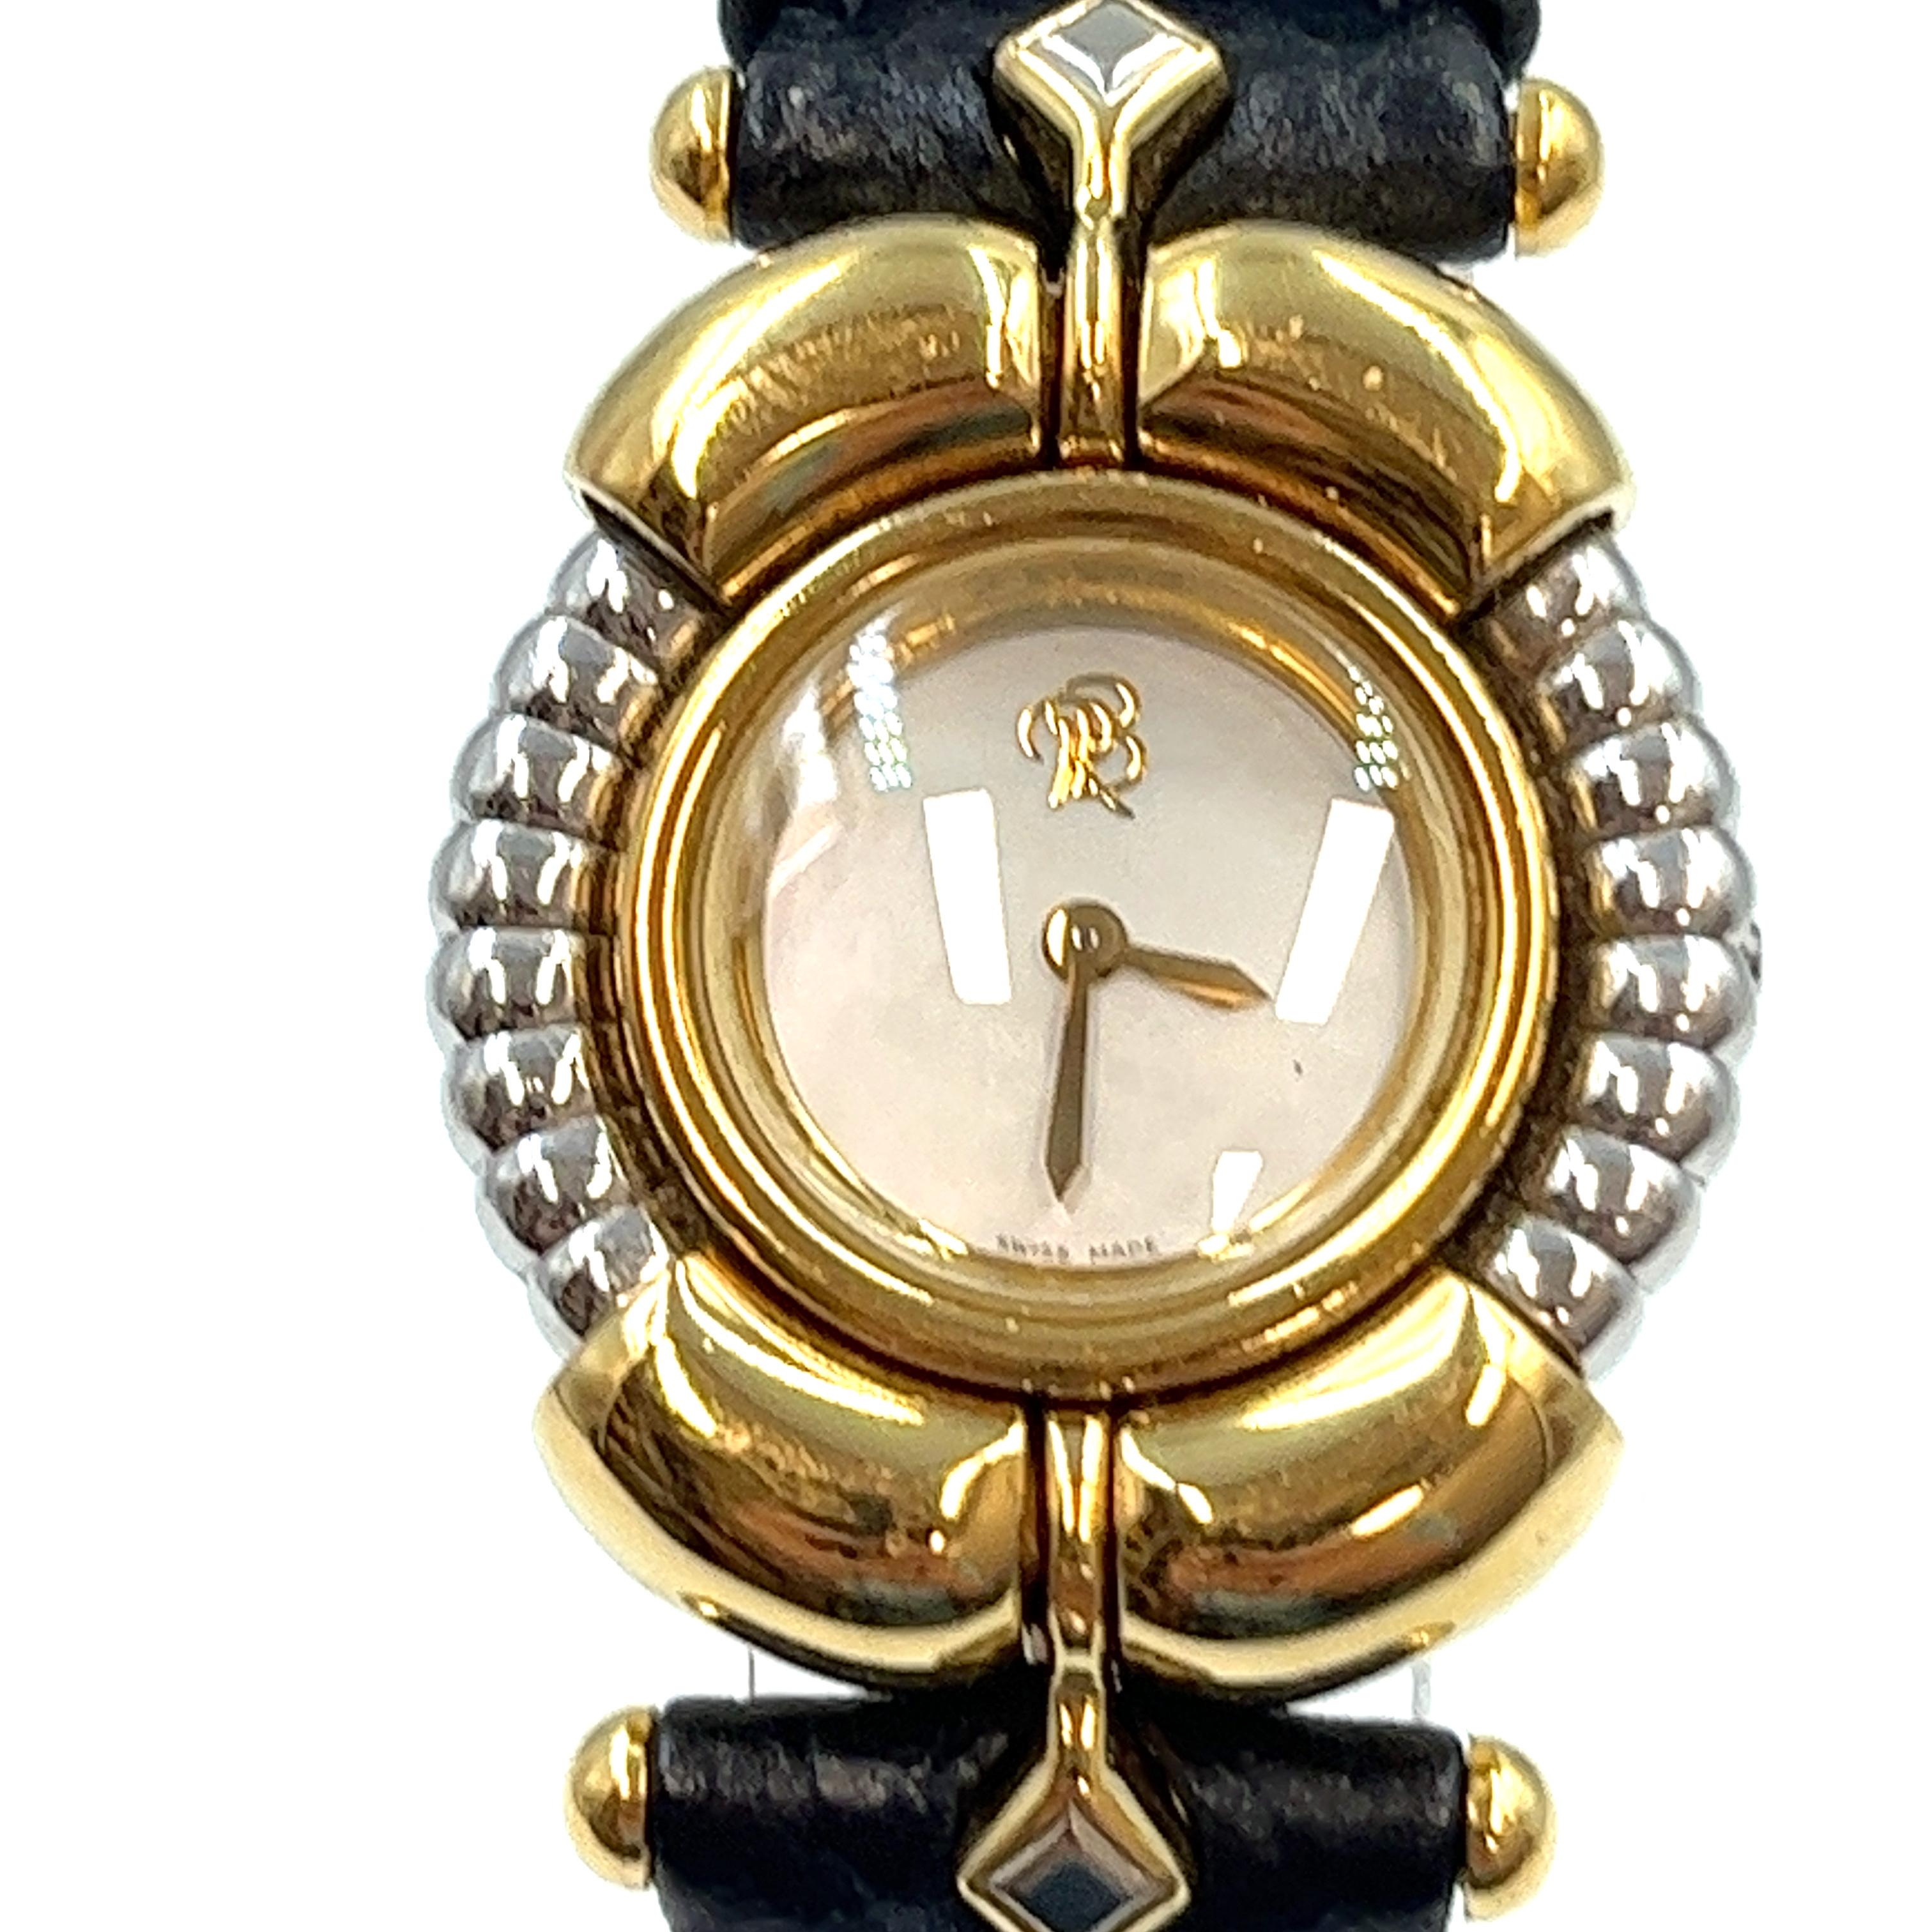 From French jewellery designer Rene Boivin comes this unique art deco style preowned Chrysalis ladies watch. 
The artistic case is crafted of 18k yellow gold with moving bezel. 
Champagne coloured dial with gold coloured hands and no numeral